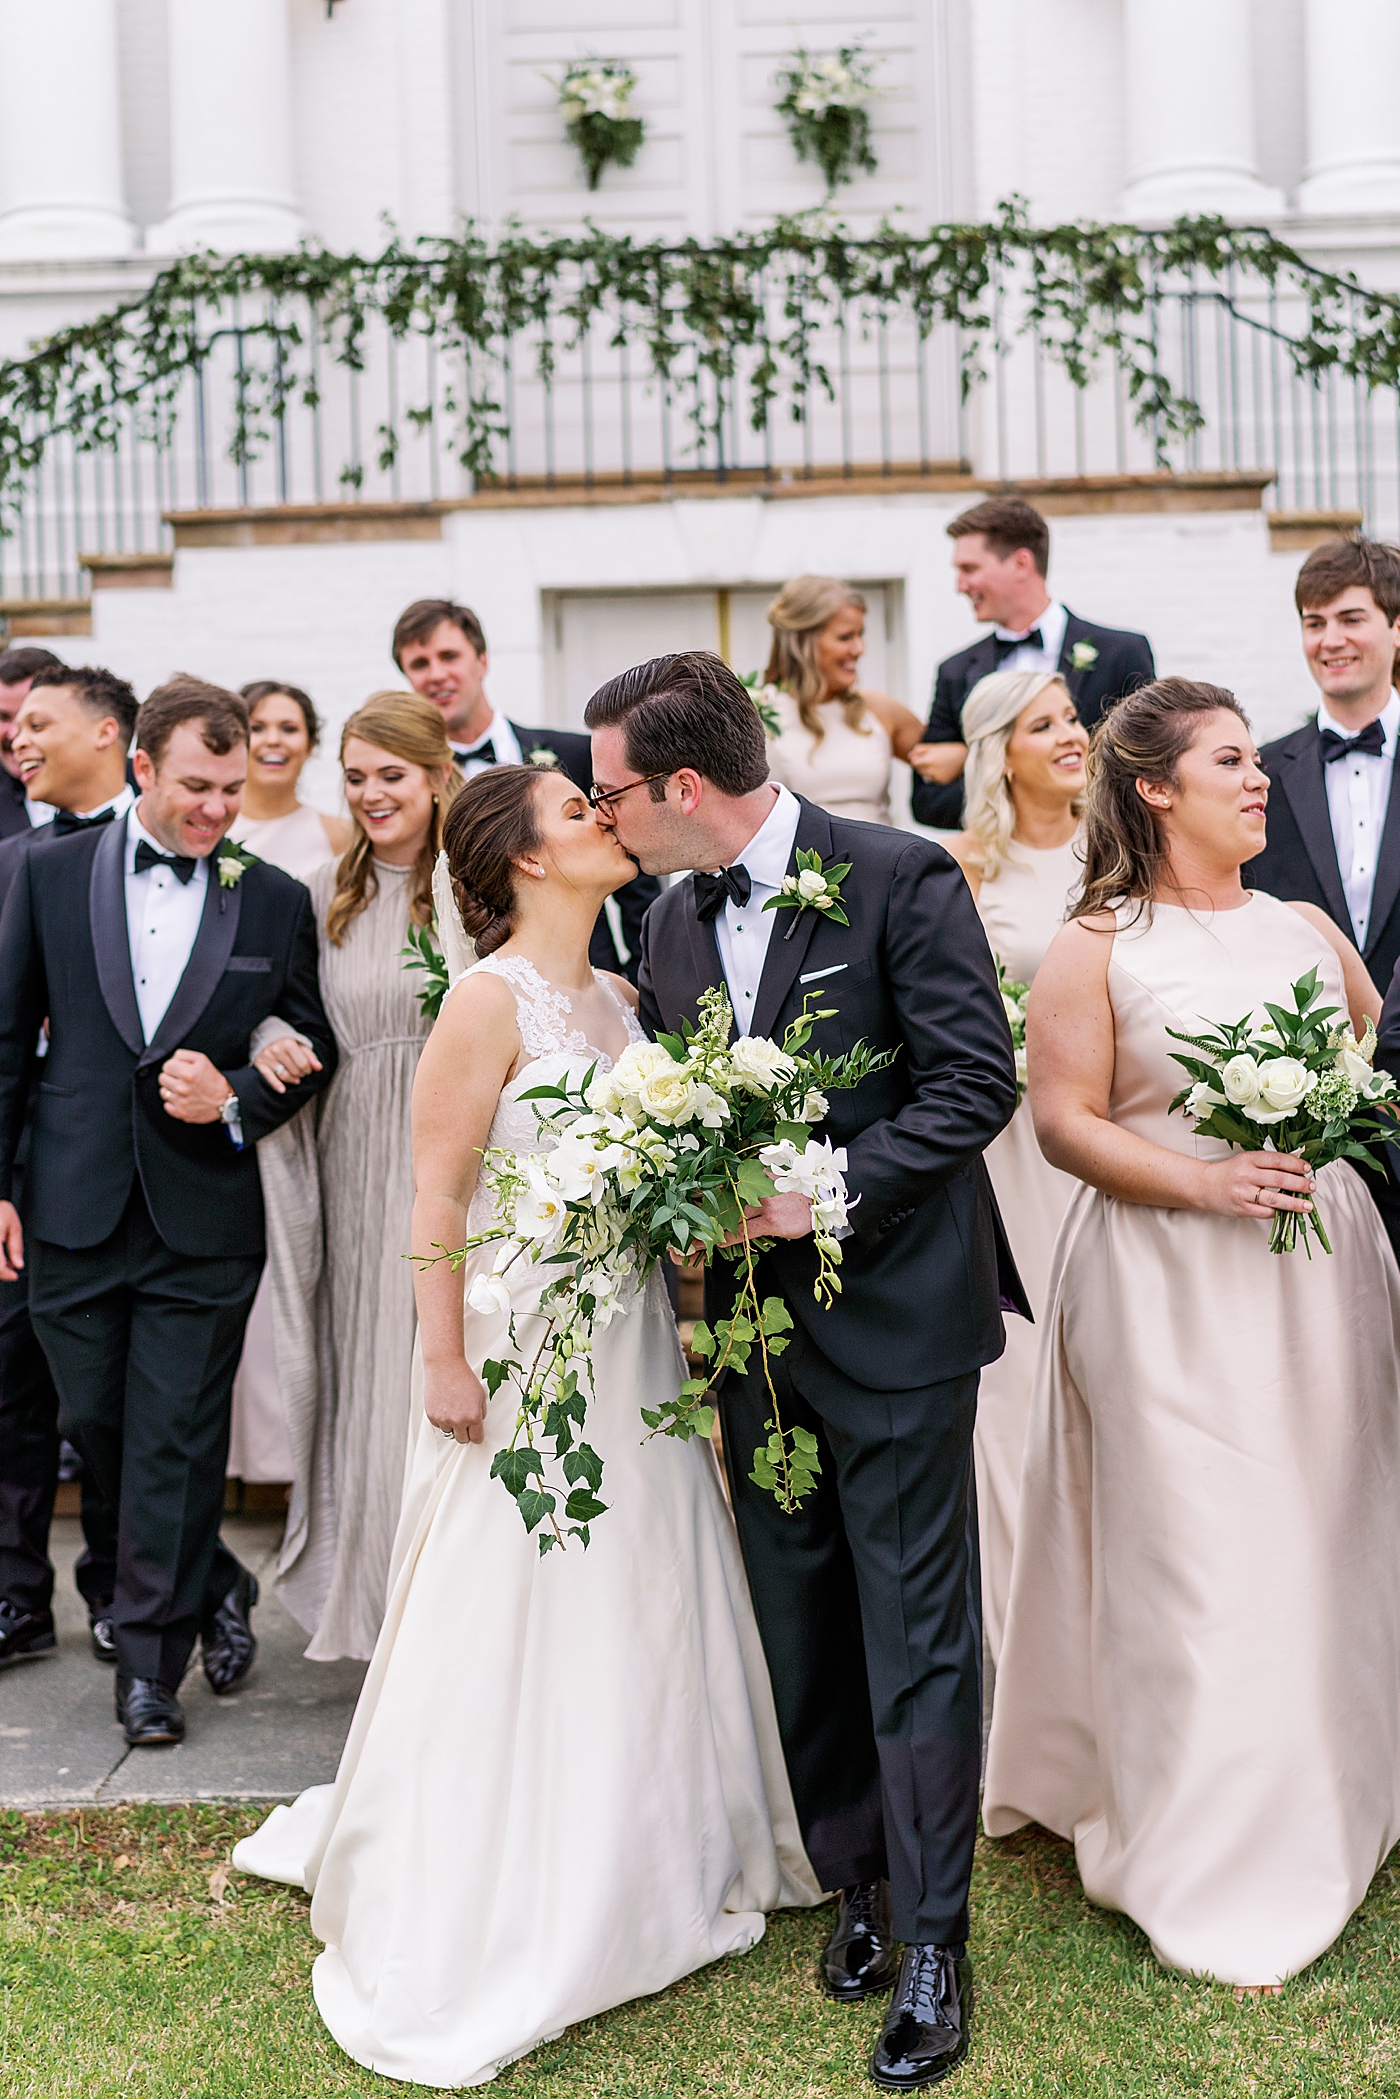 Bride and groom kissing standing in front of their wedding party | Photo by Annie Laura Photography